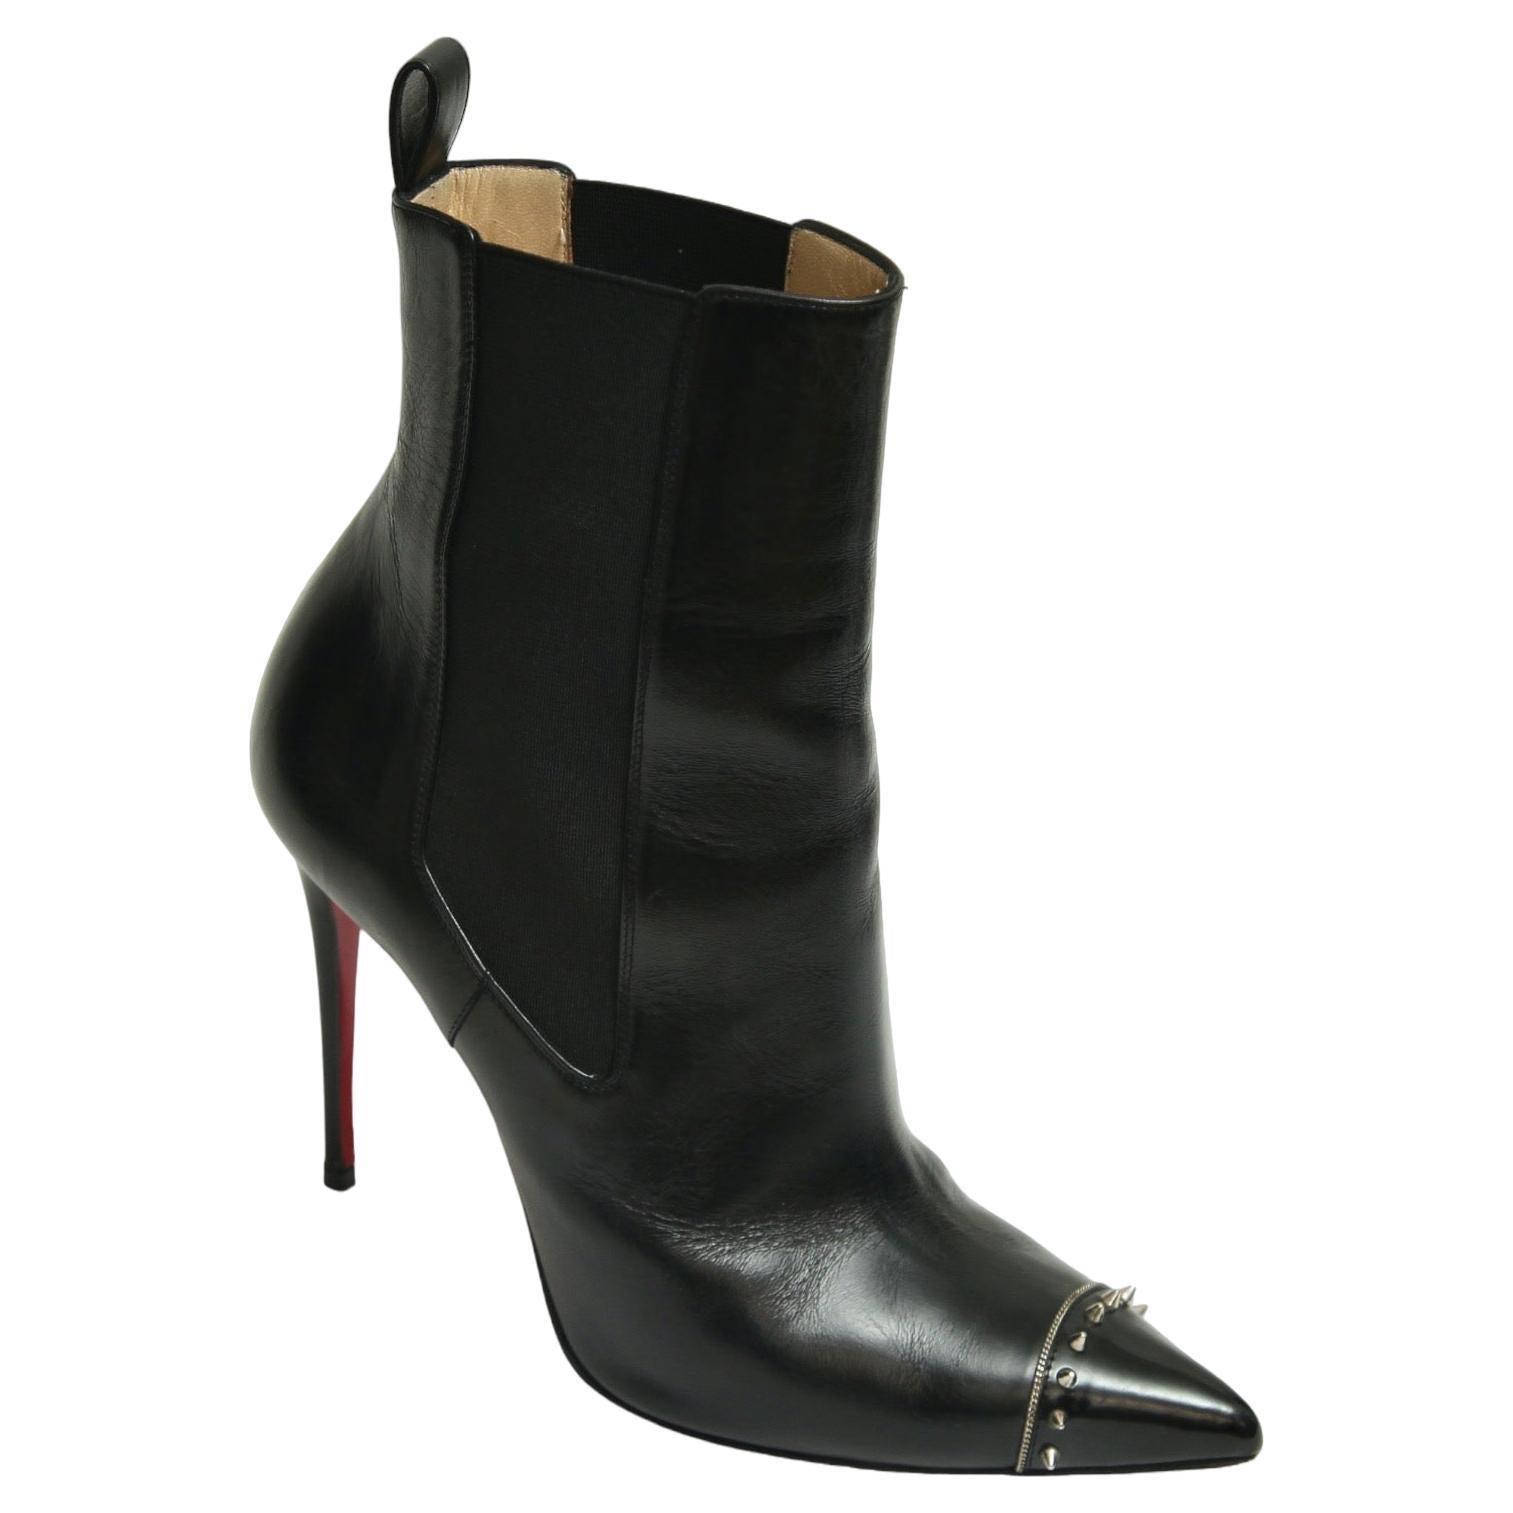 CHRISTIAN LOUBOUTIN Black Leather Bootie BANJO Ankle Boot Spiked Cap Toe 38.5 For Sale